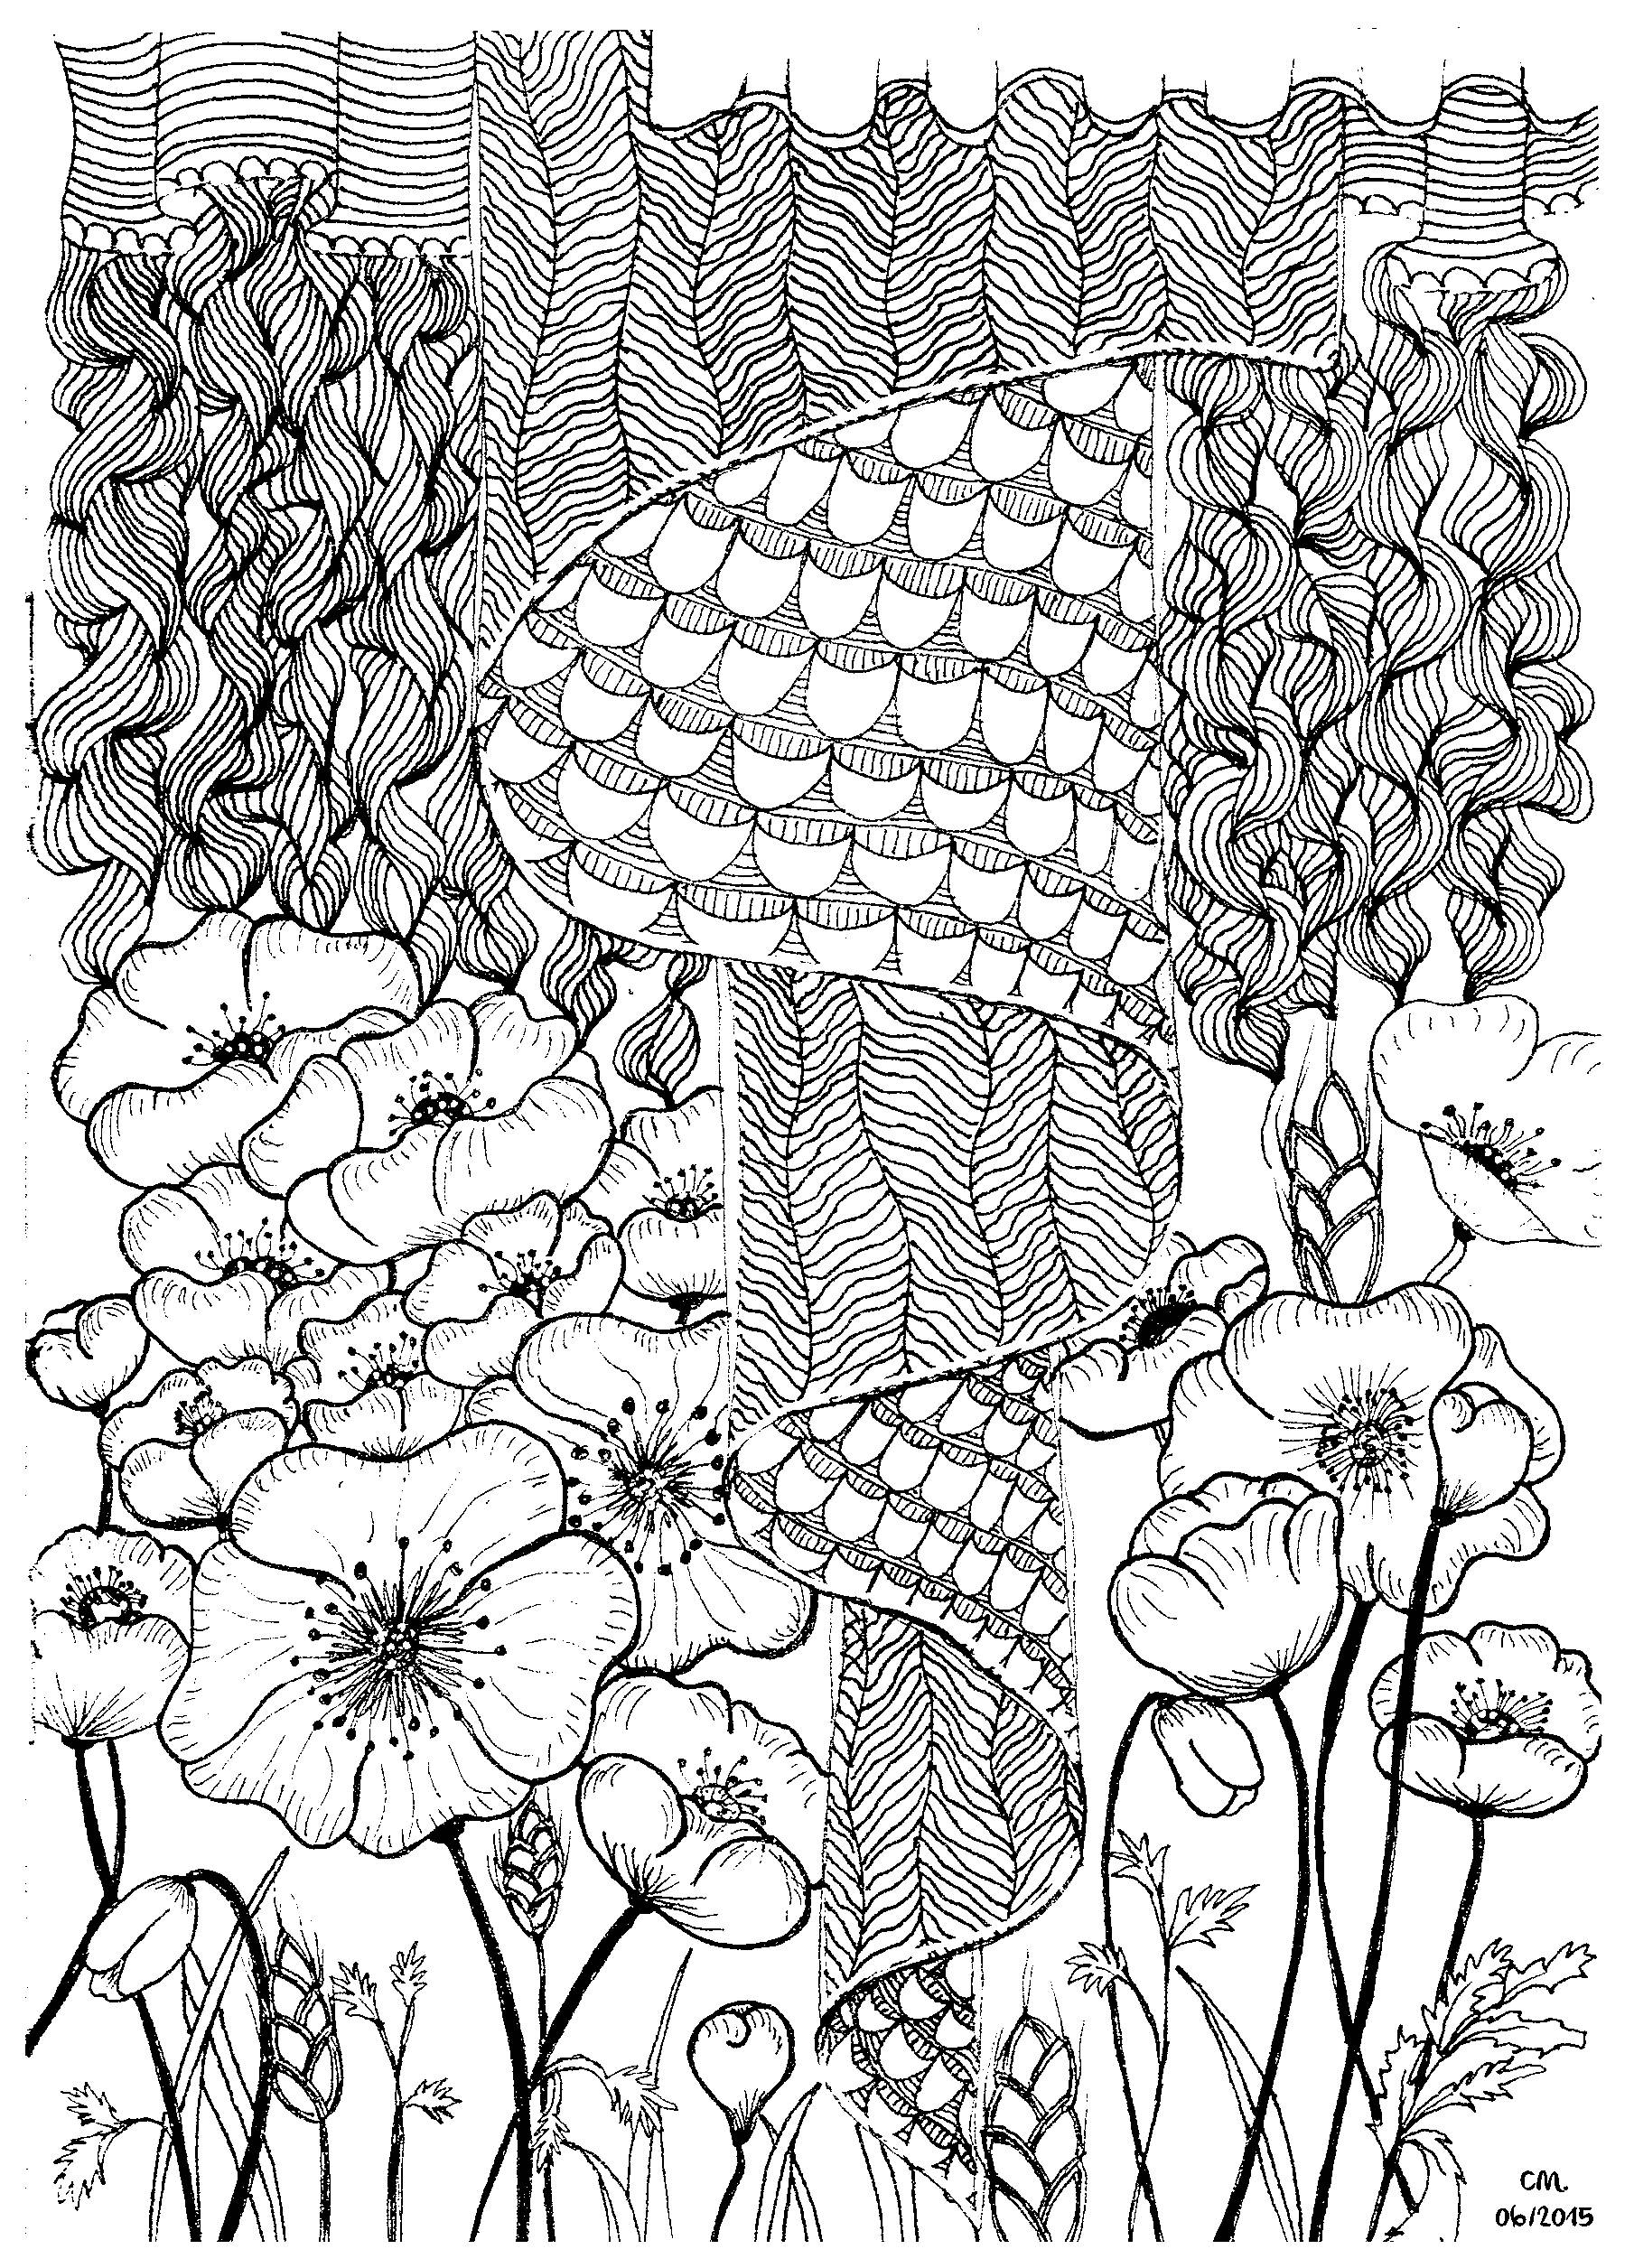 Zentangle by cathym 2 - Zentangle Adult Coloring Pages